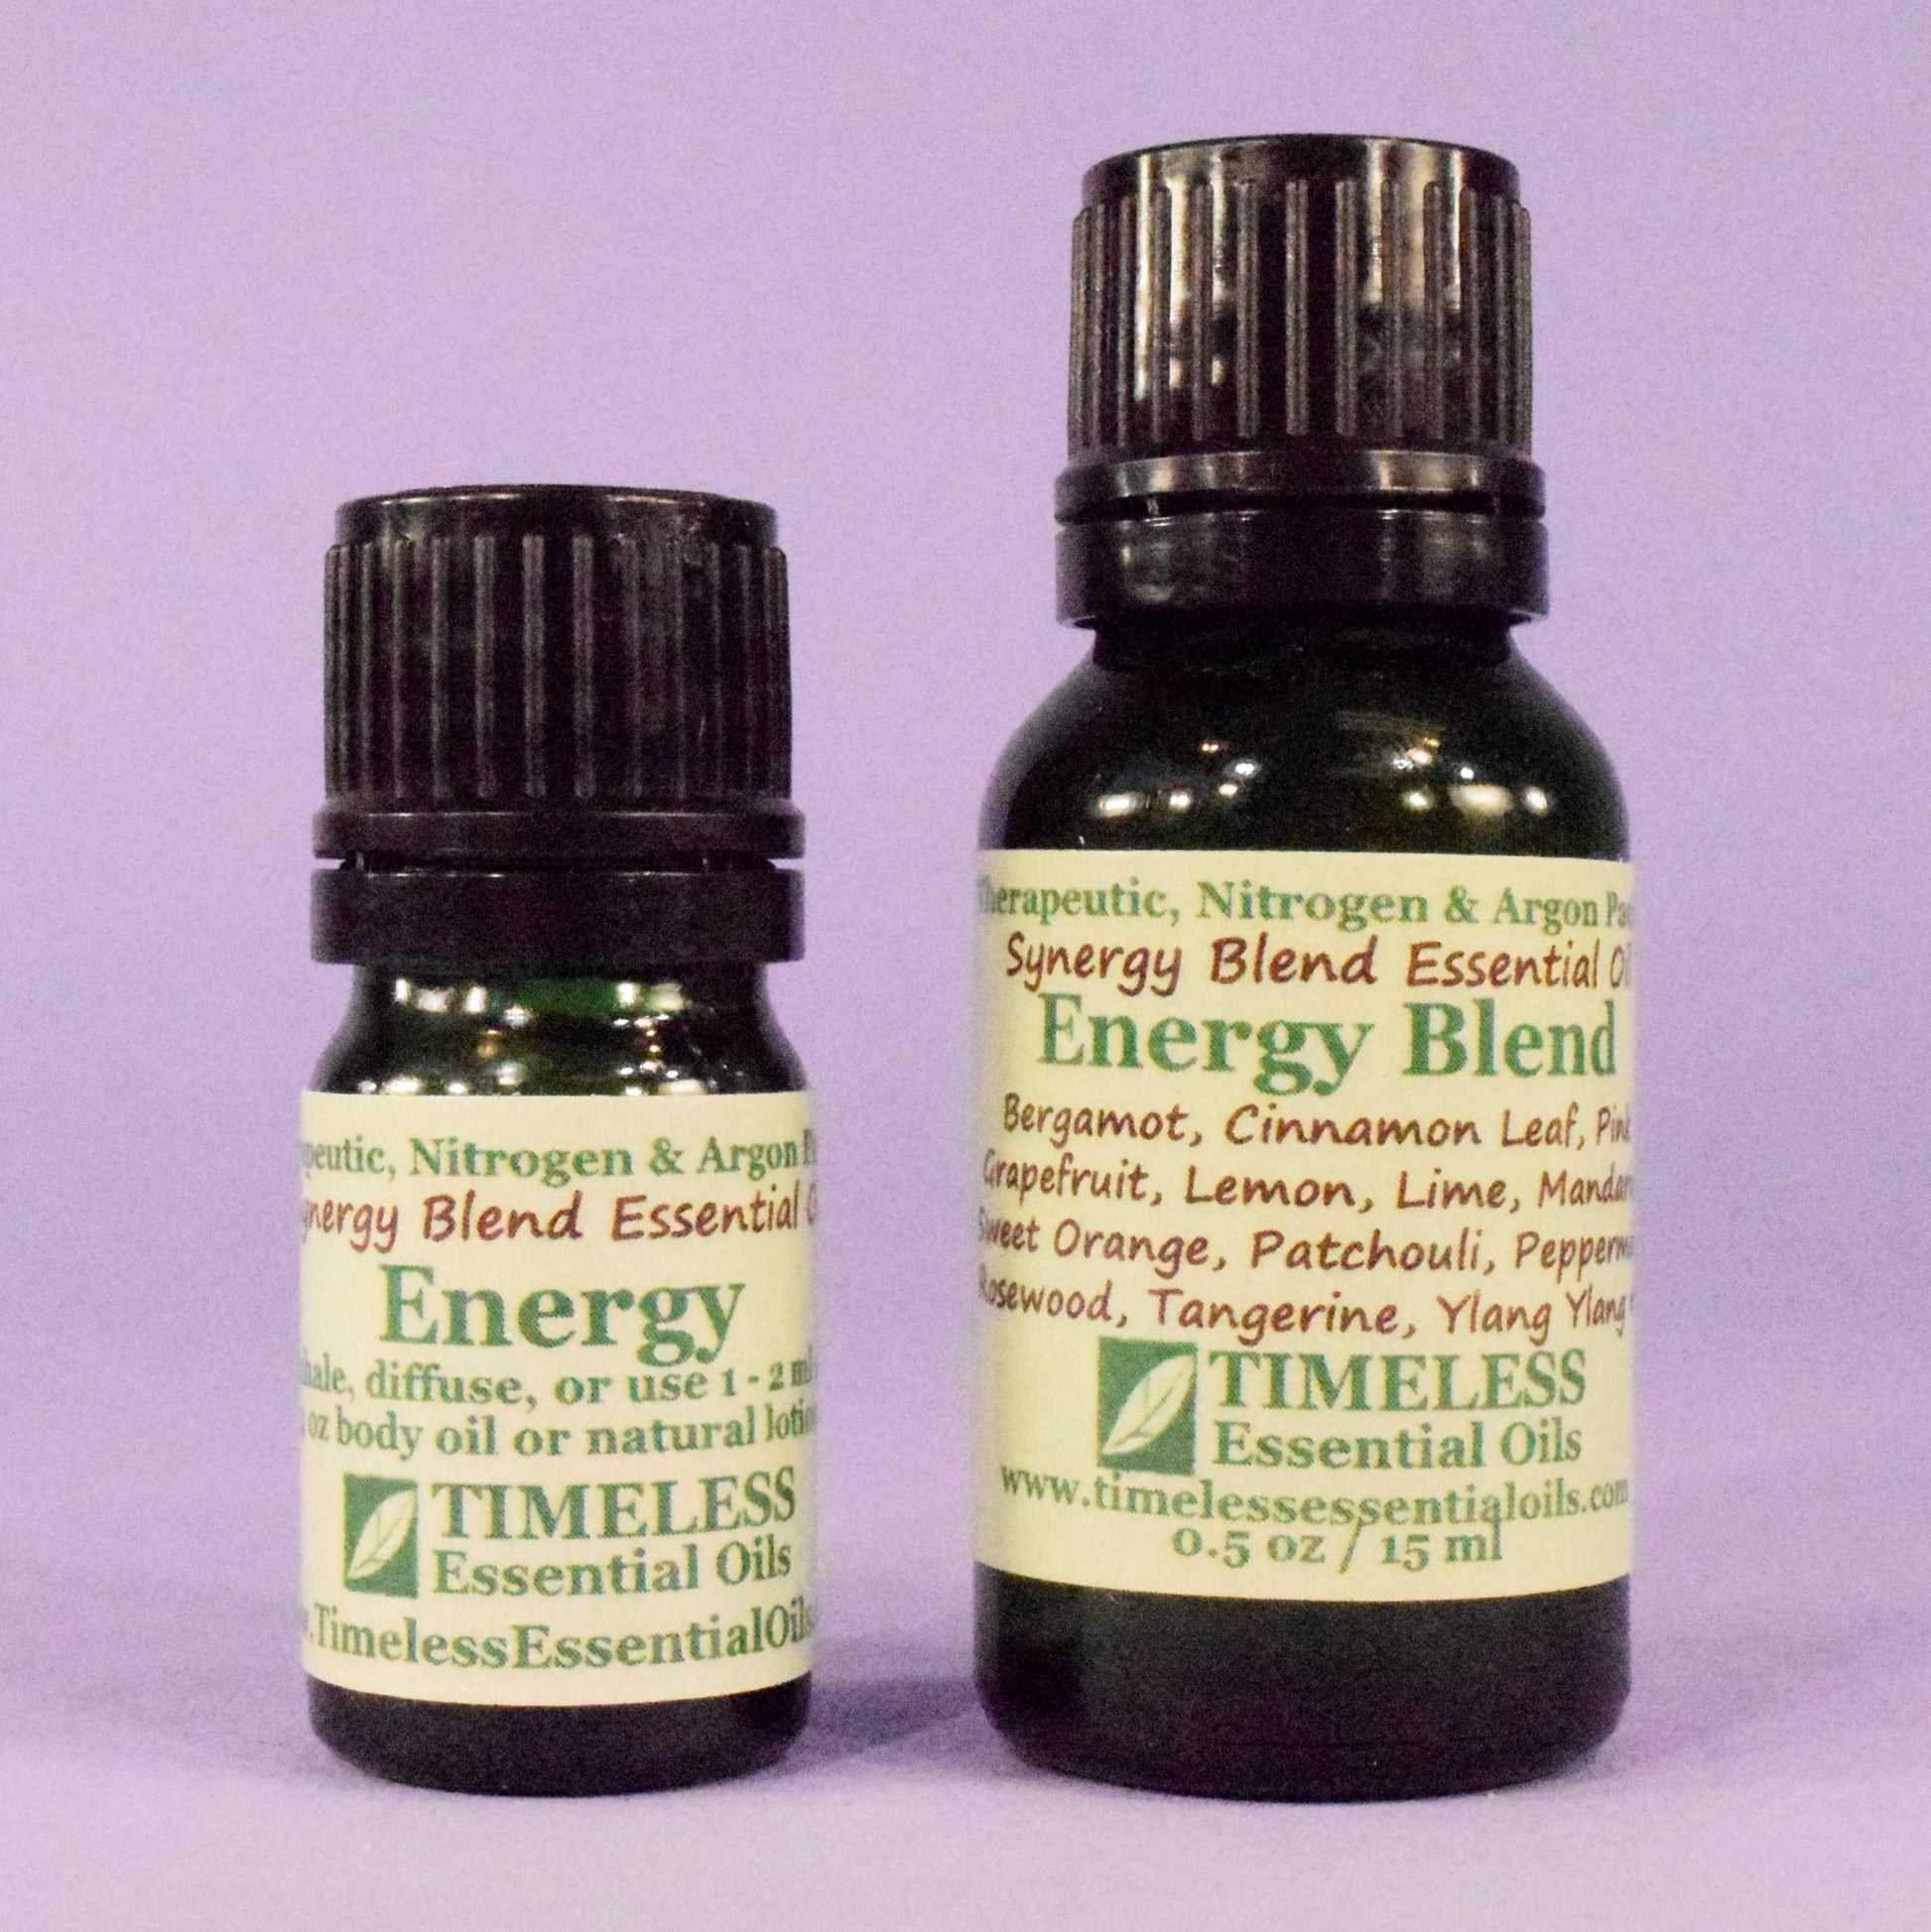 TIMELESS Essential Oils Energy Synergy Blend is revitalizing and increases stamina.